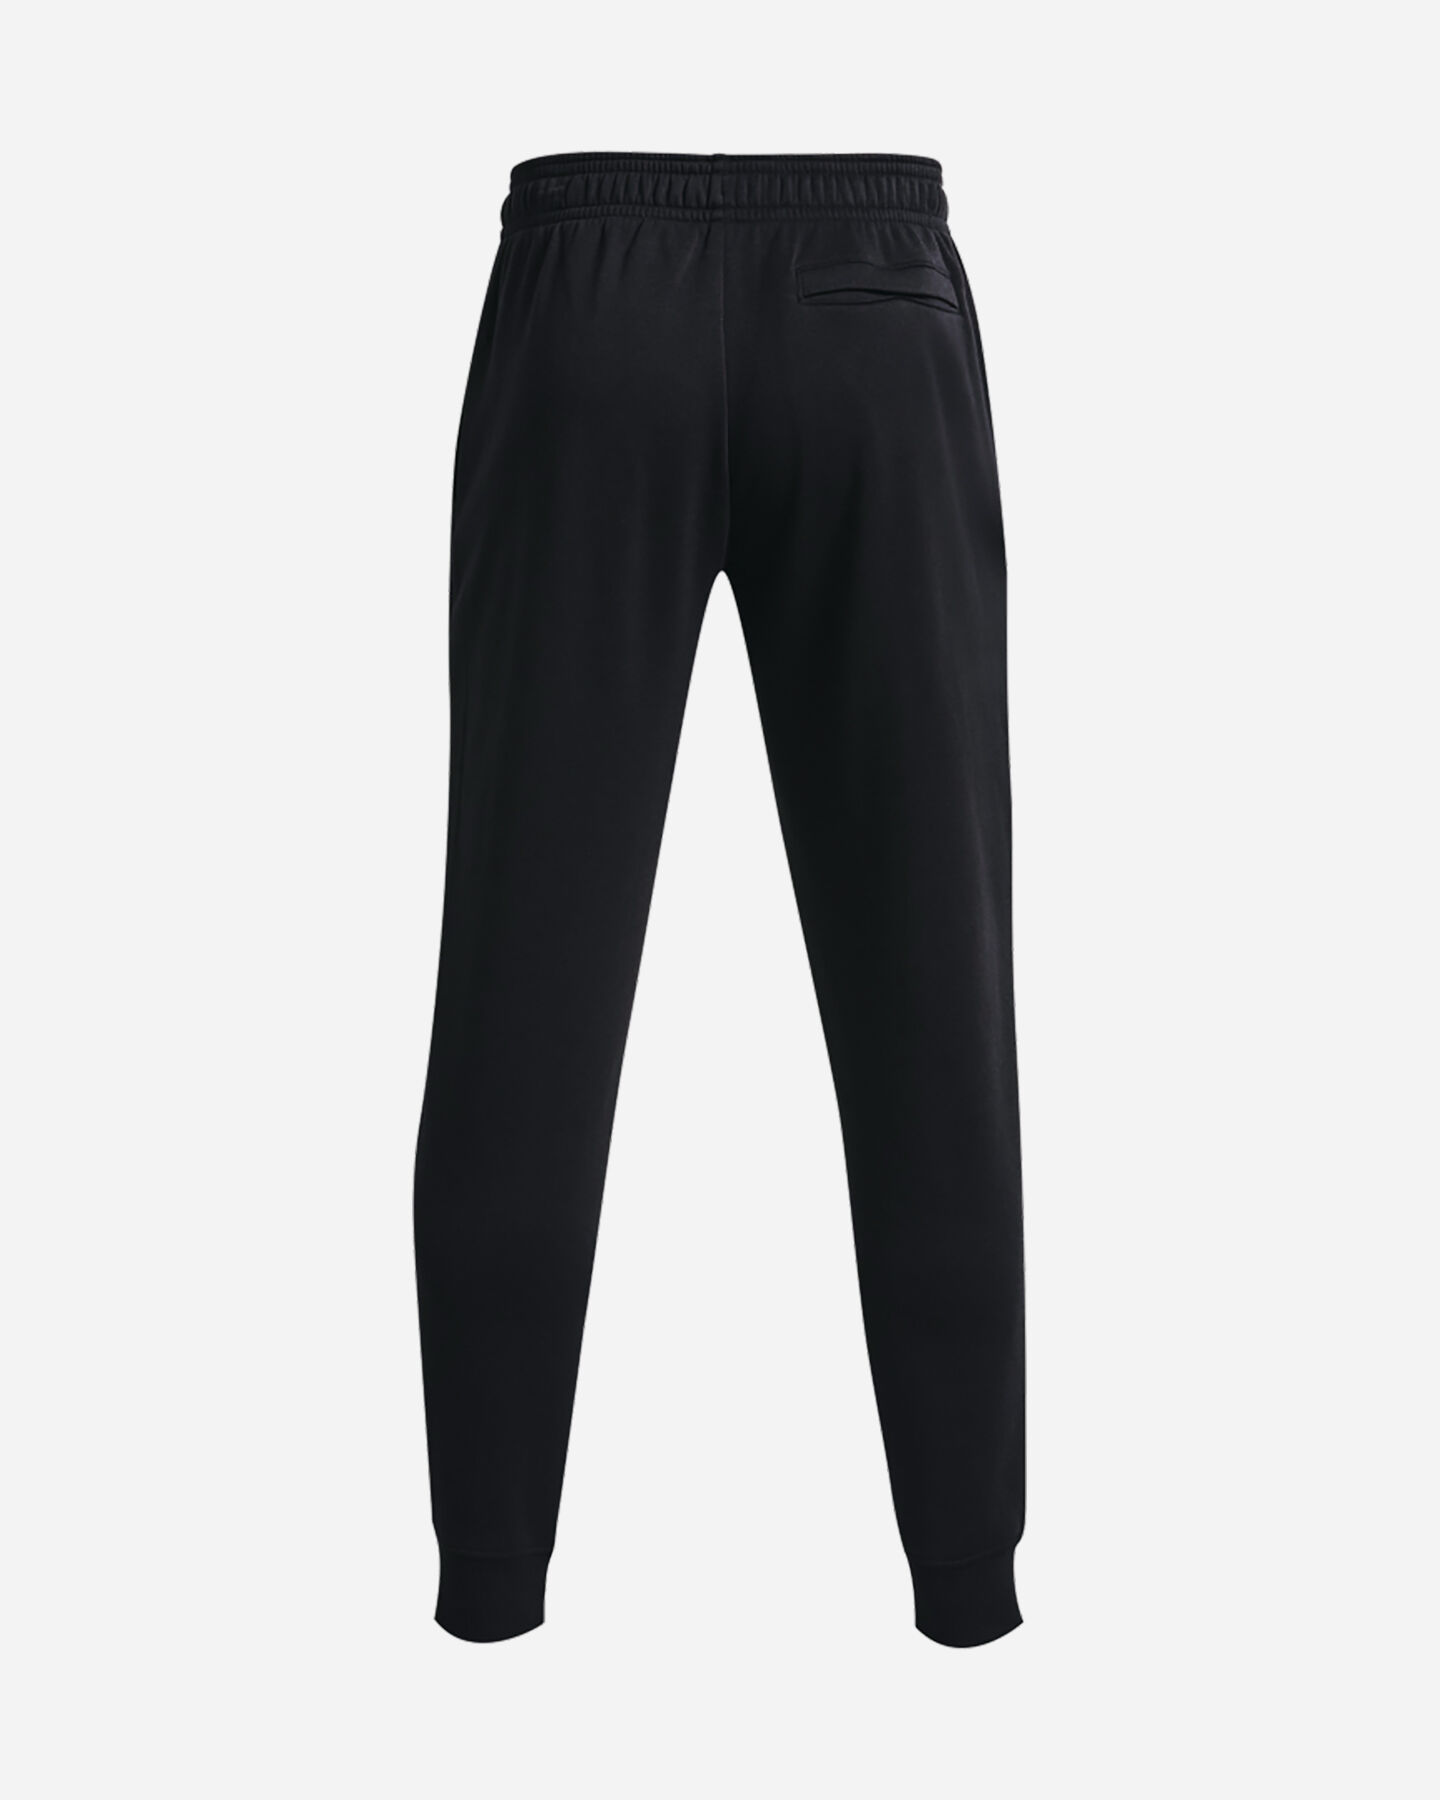  Pantalone UNDER ARMOUR A RIVAL LIGHT LOGO GRAPHIC M S5390471 scatto 1